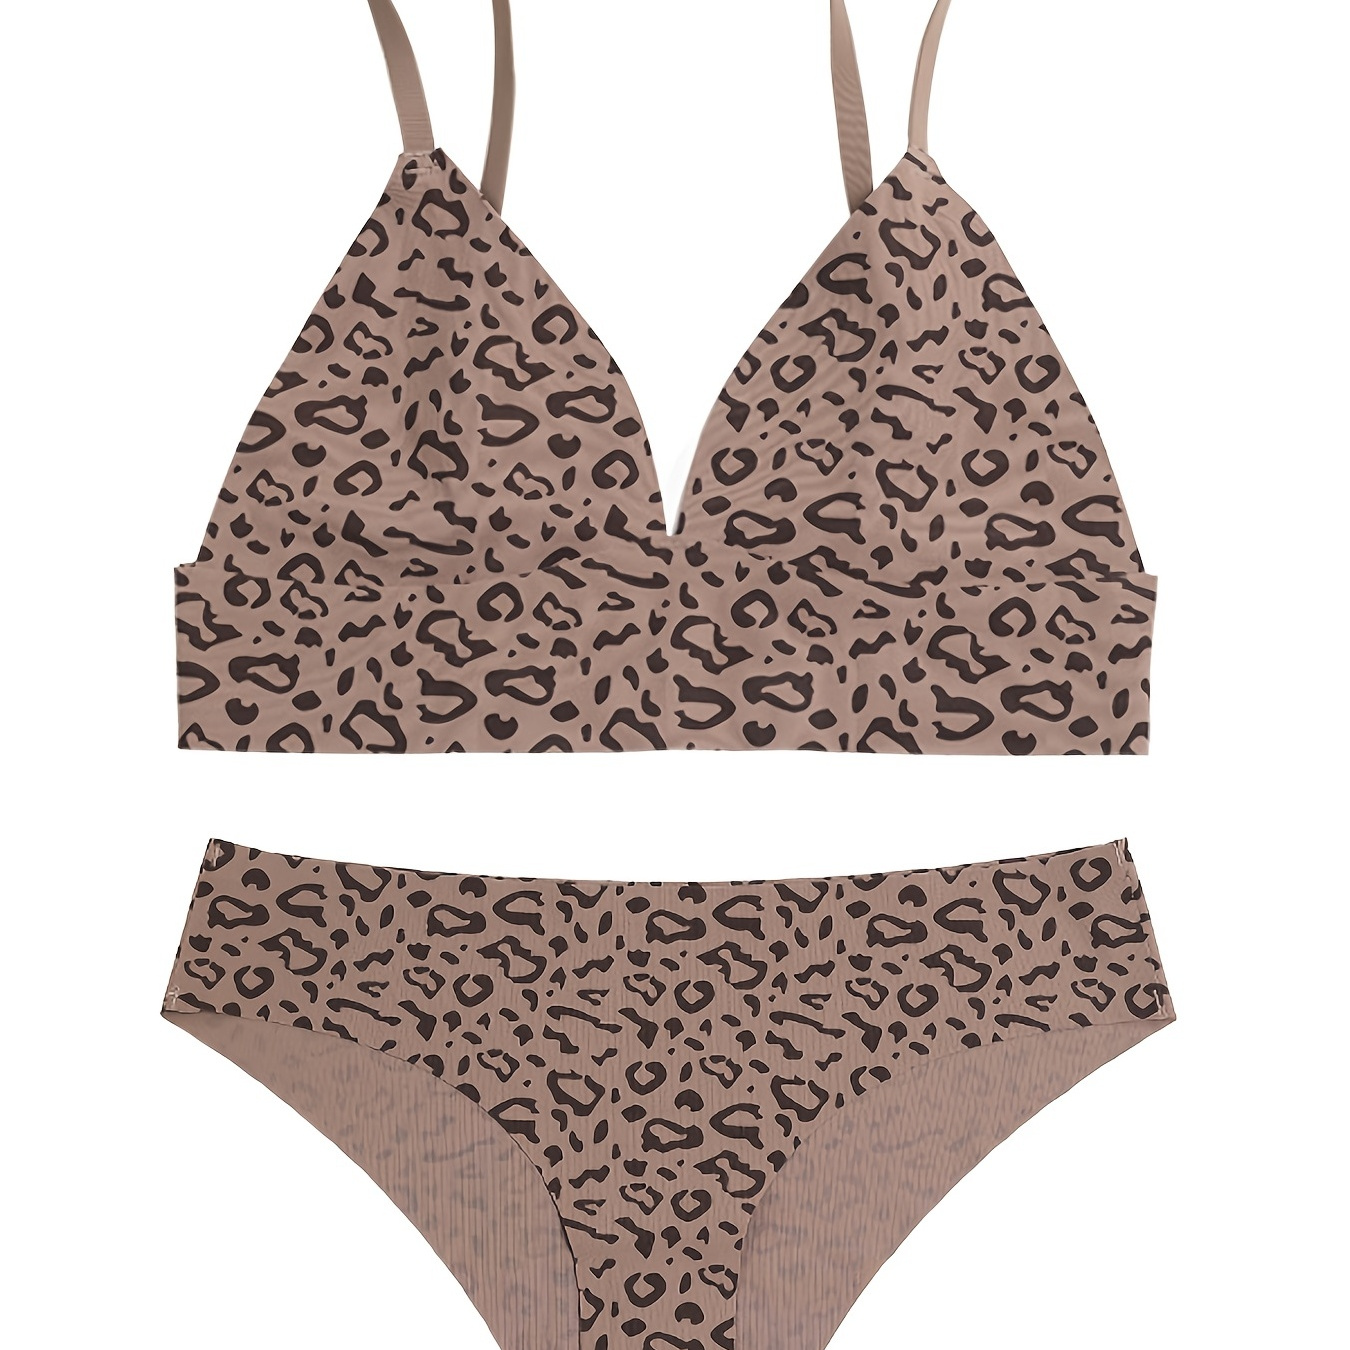 Sexy Leopard Print Seamless Lingerie Set, Breathable Push Up Bra